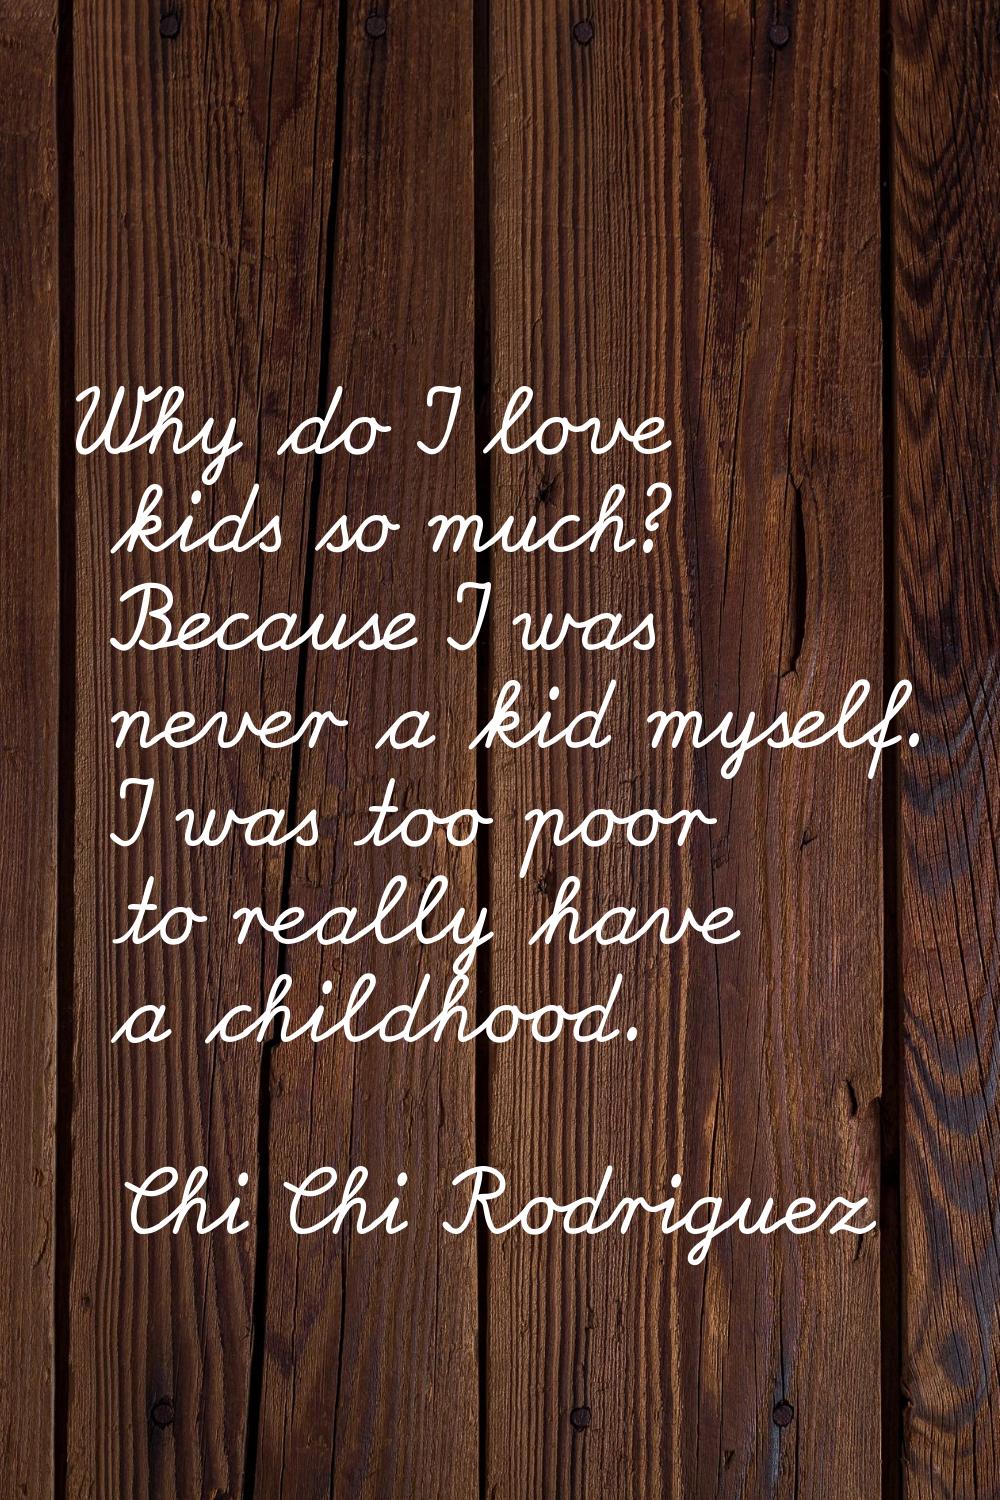 Why do I love kids so much? Because I was never a kid myself. I was too poor to really have a child